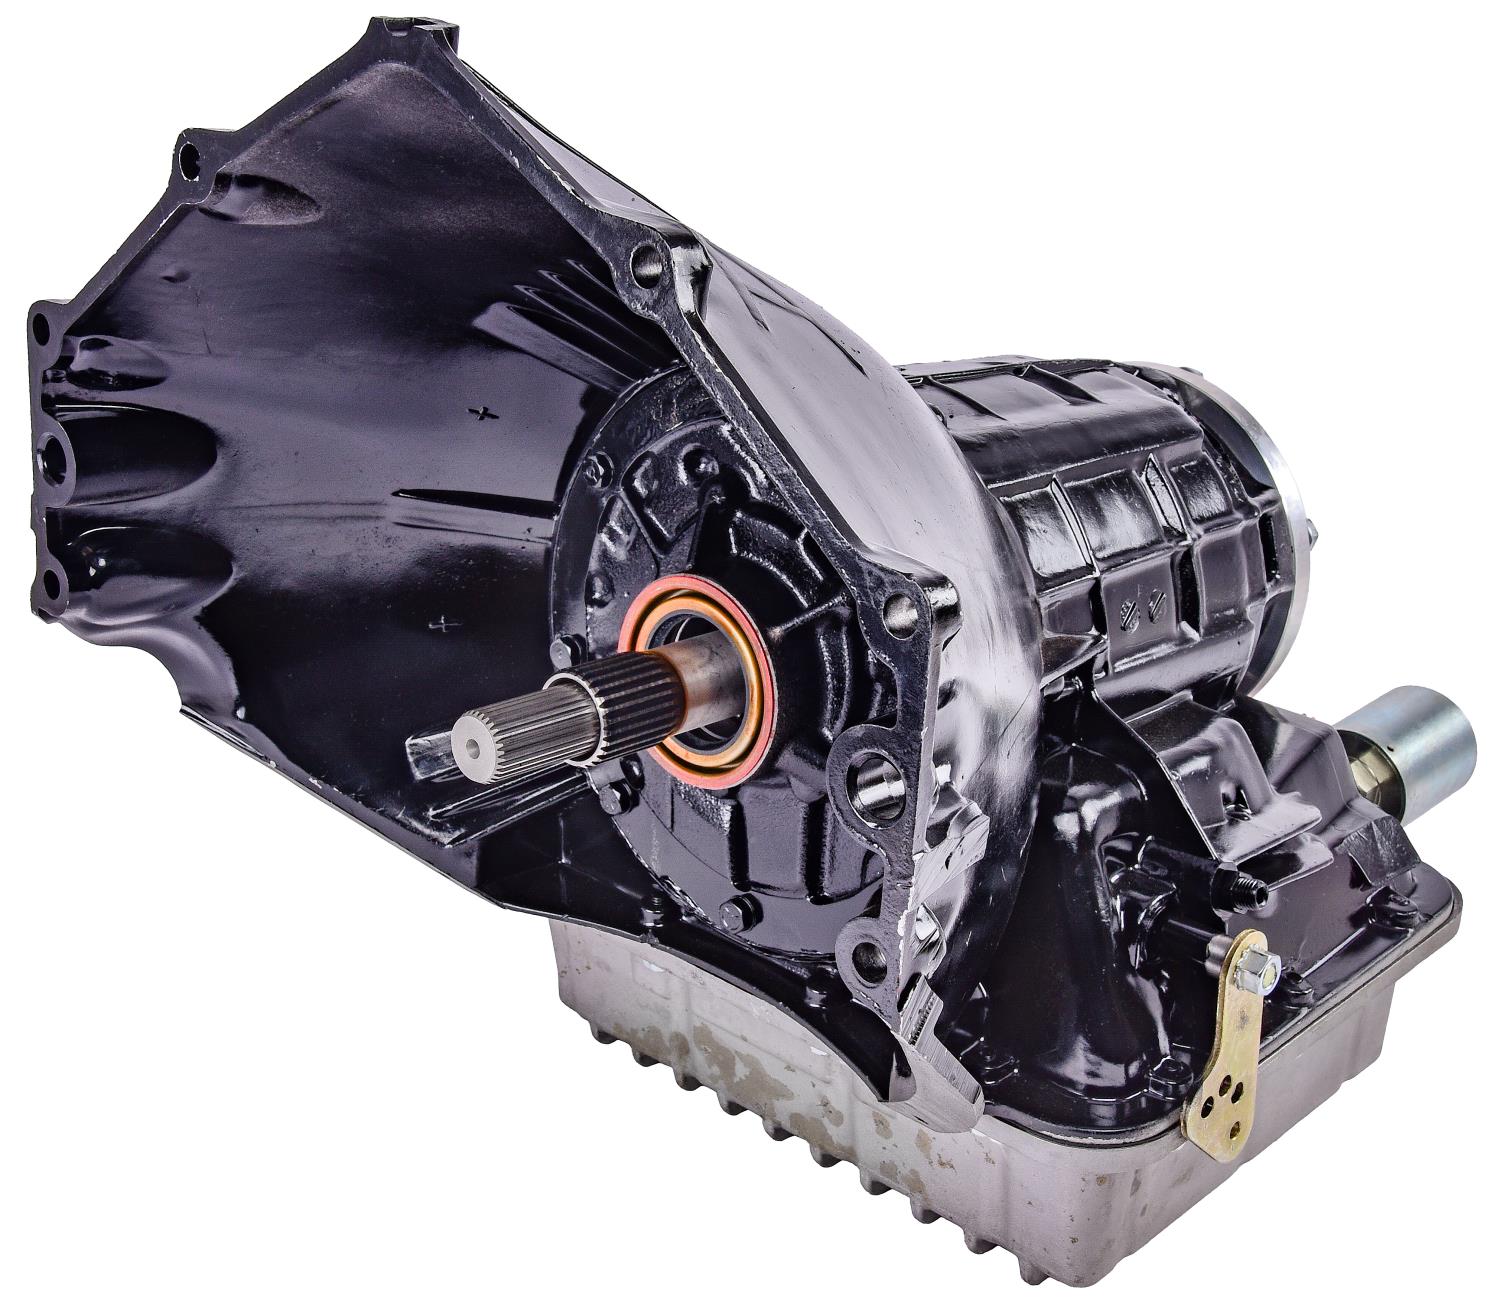 Race Prepped GM Powerglide Transmission, Short Tail [Rated up to 1200 HP]